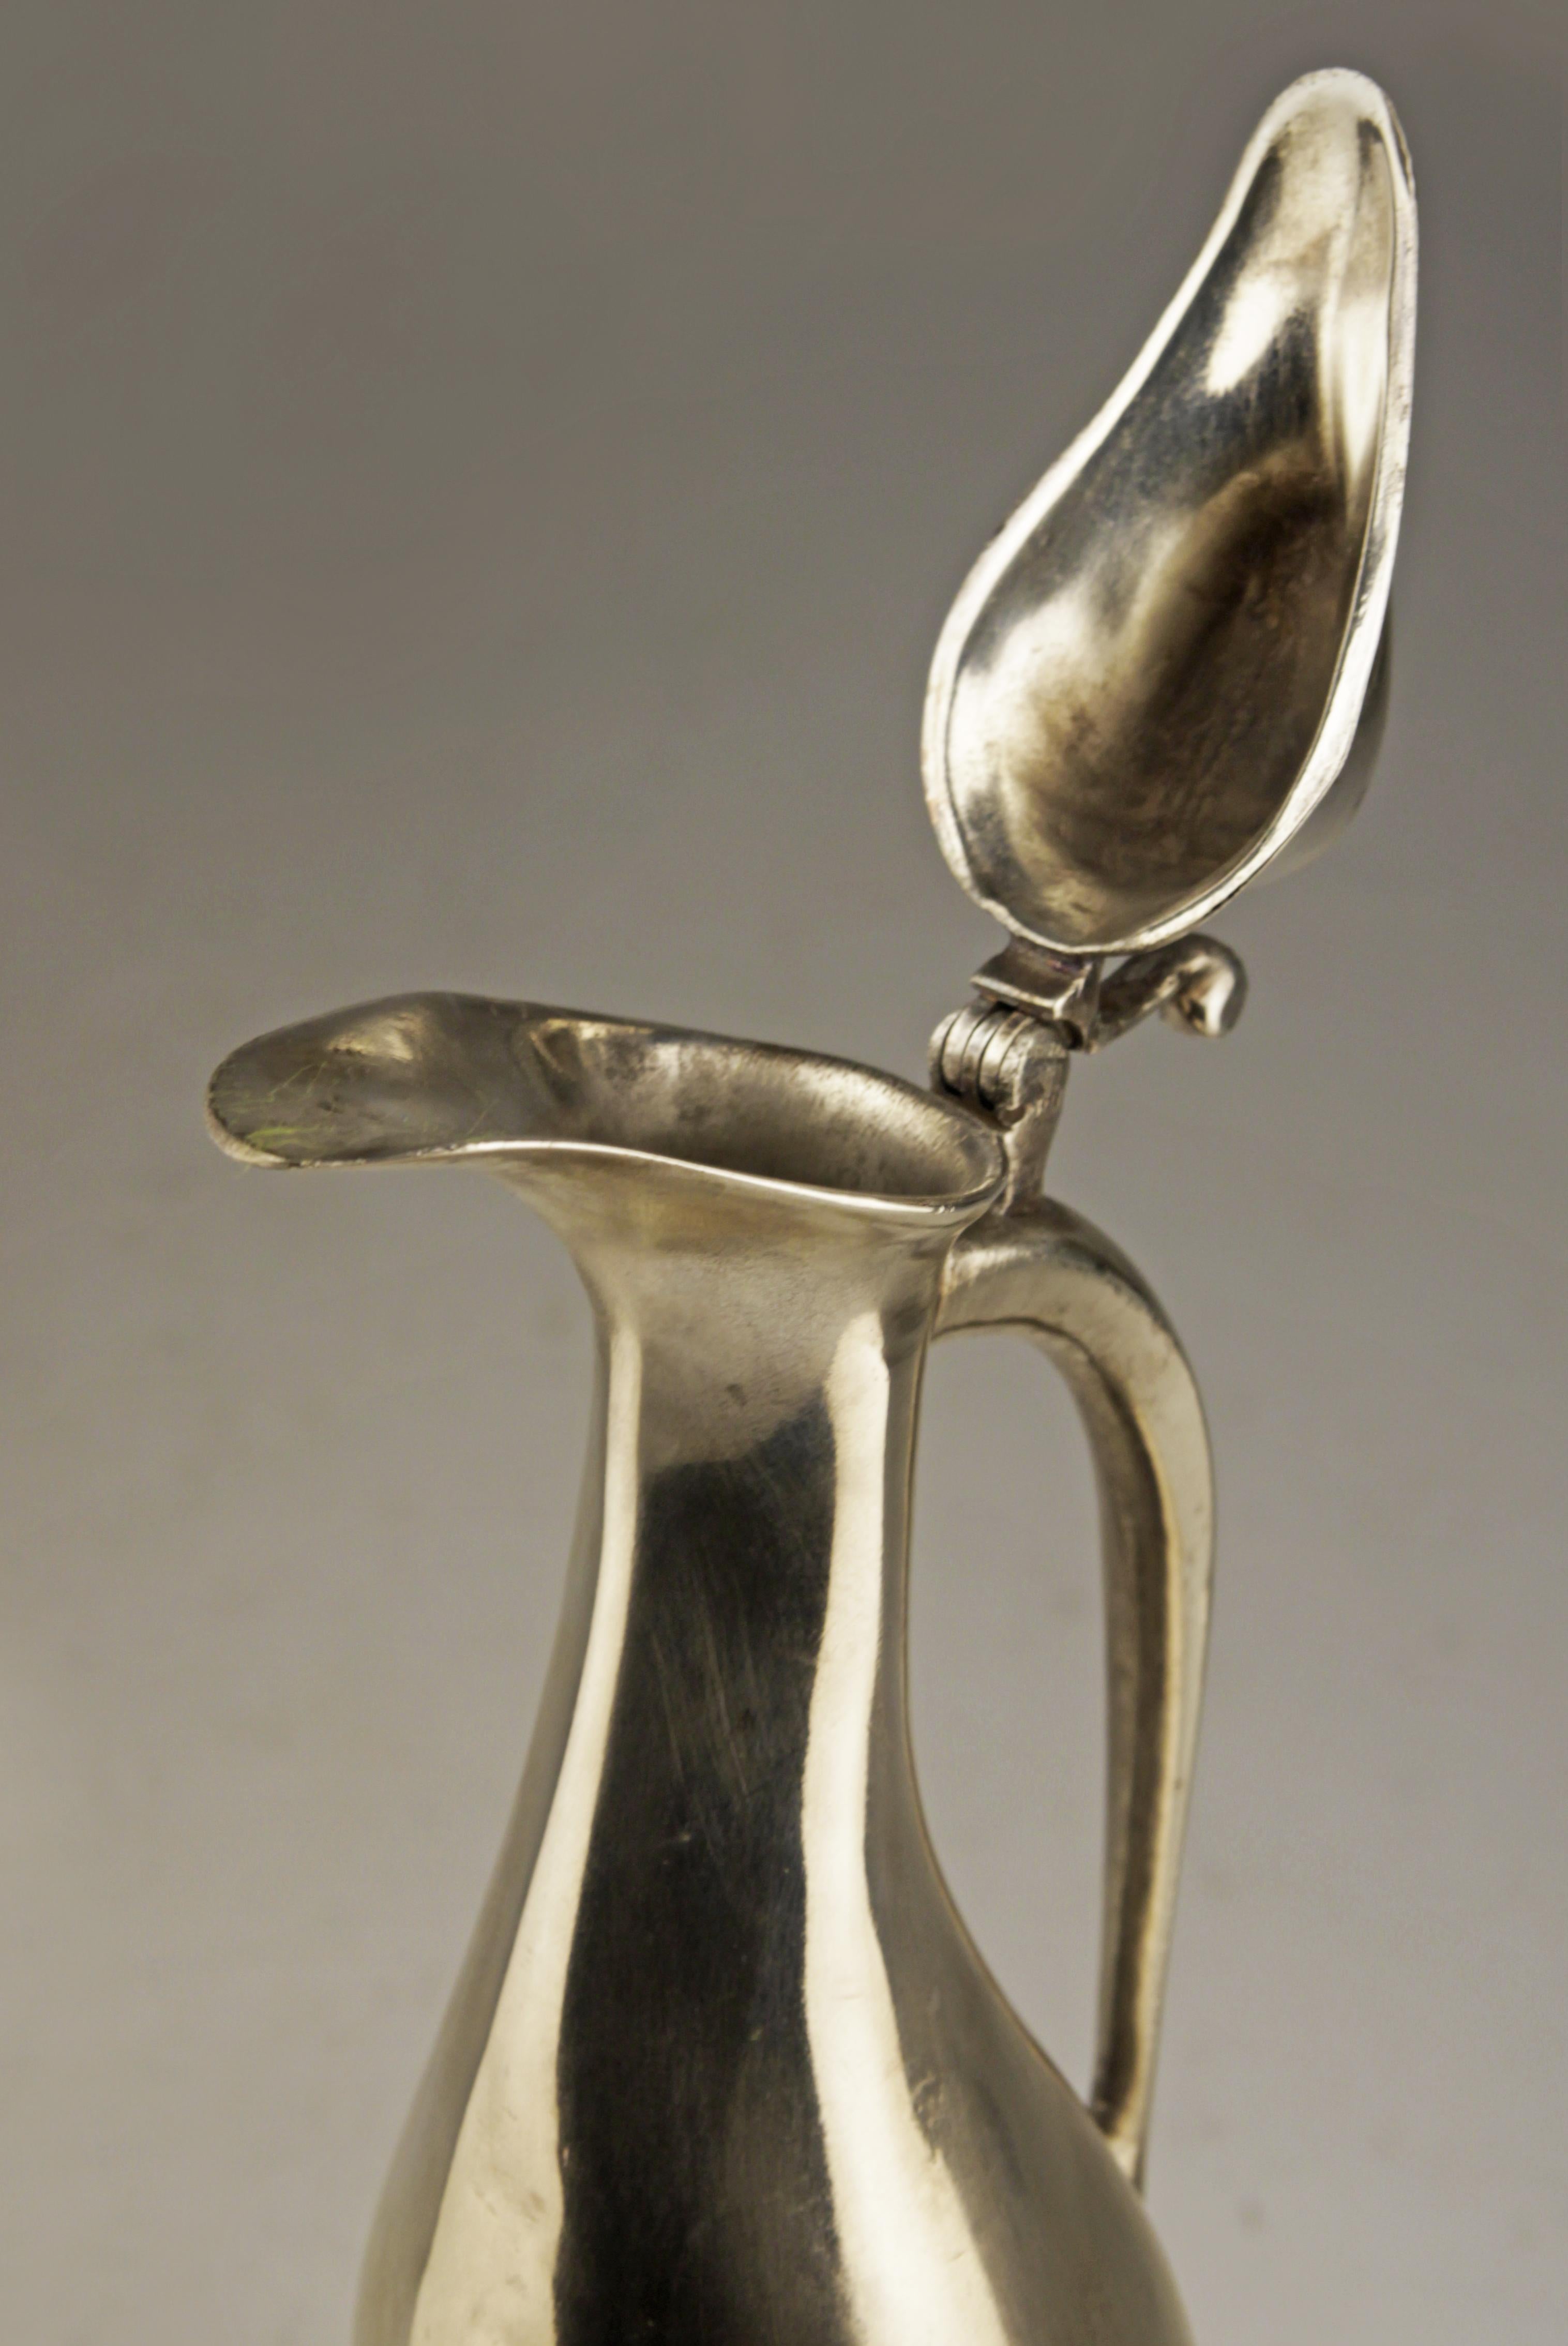 Polished Pewter Penguin-Shaped Decanter Designed by Hugo Leven for Kayserzinn In Good Condition For Sale In North Miami, FL